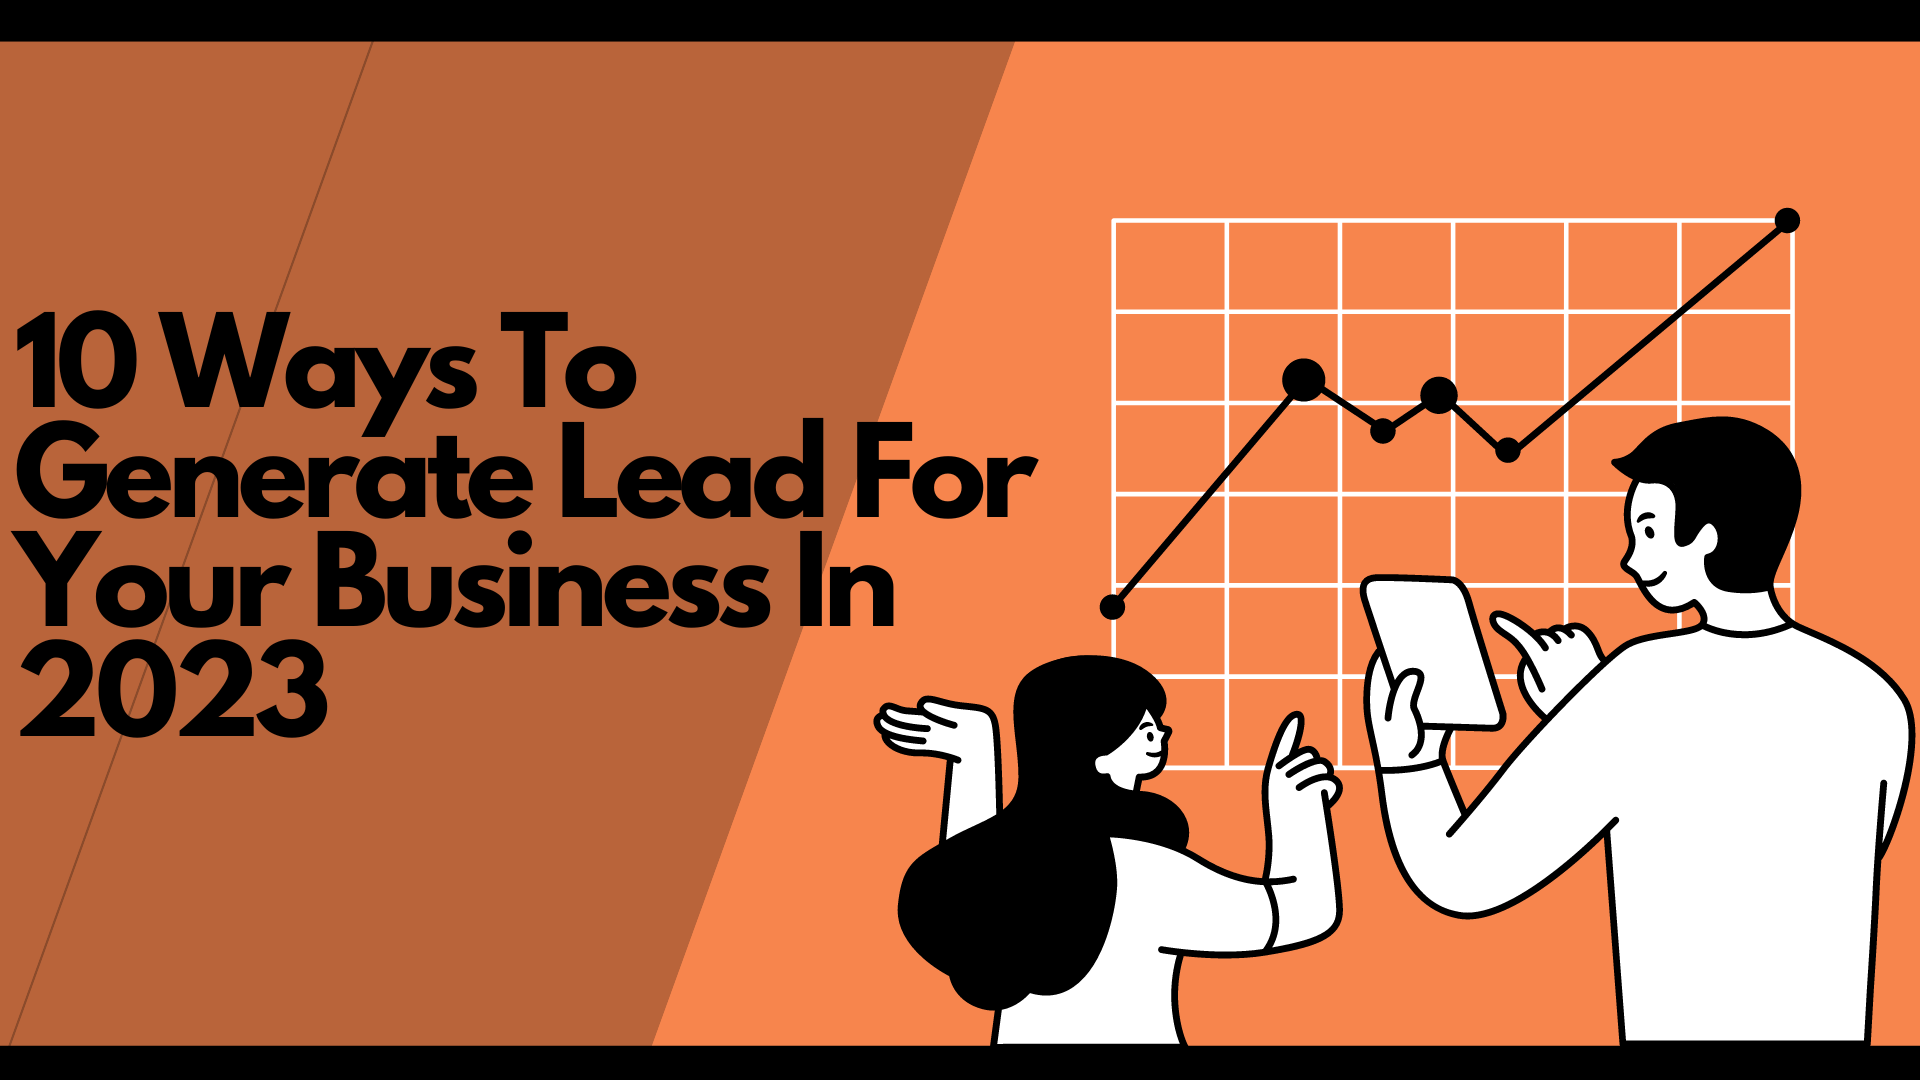 10 Ways To Generate Lead For Your Business In 2023